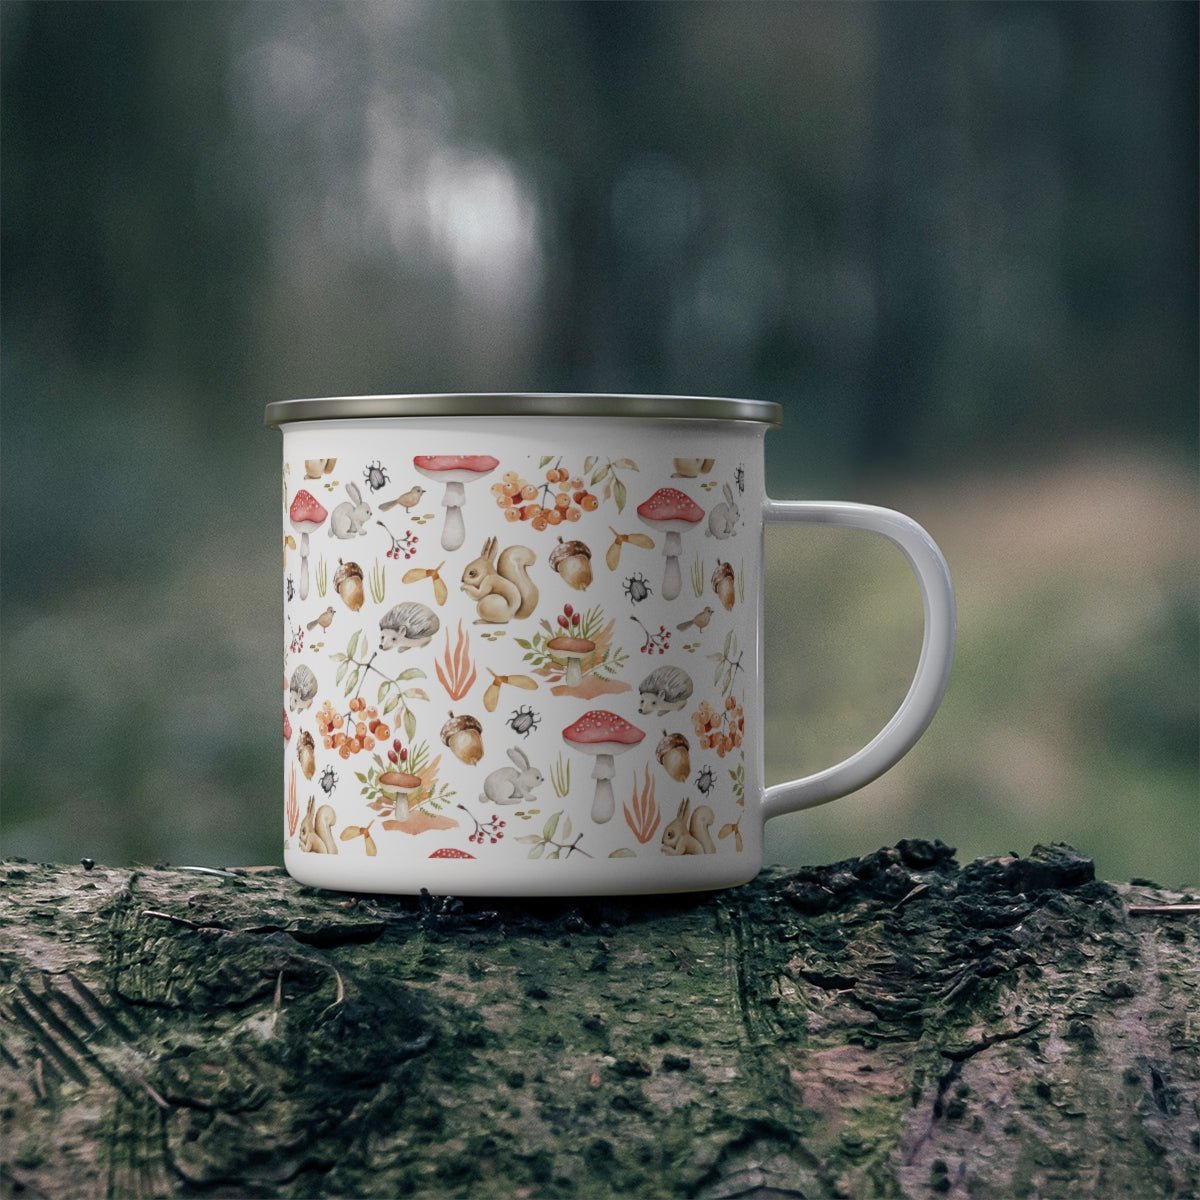 Fall Forest Animals Stainless Steel Camping Mug - Puffin Lime